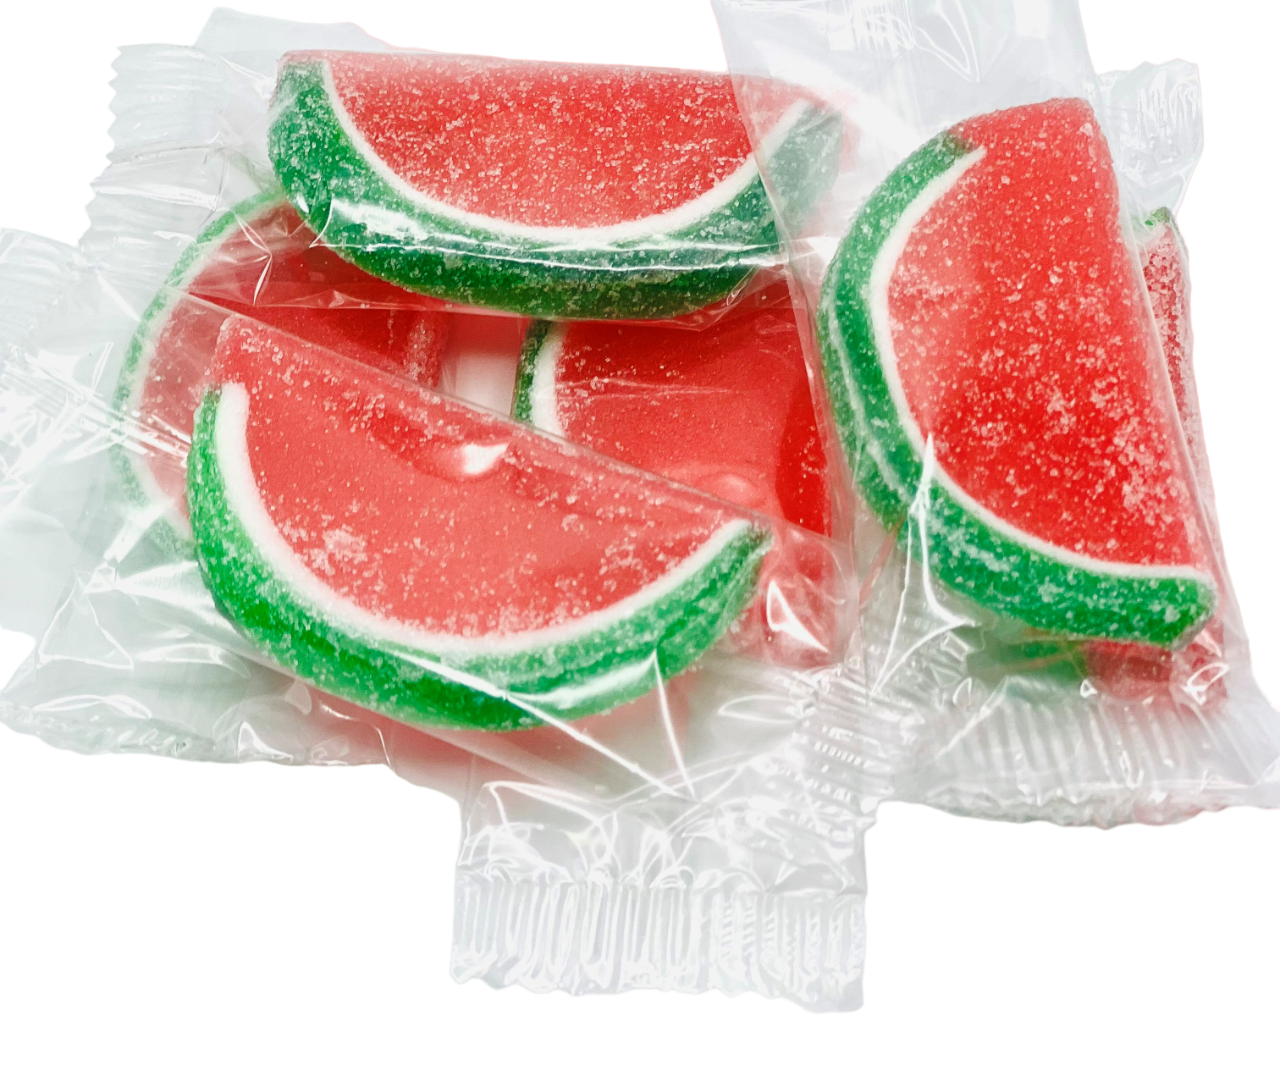 Strawberry Jelly Fruit Slices Wrapped